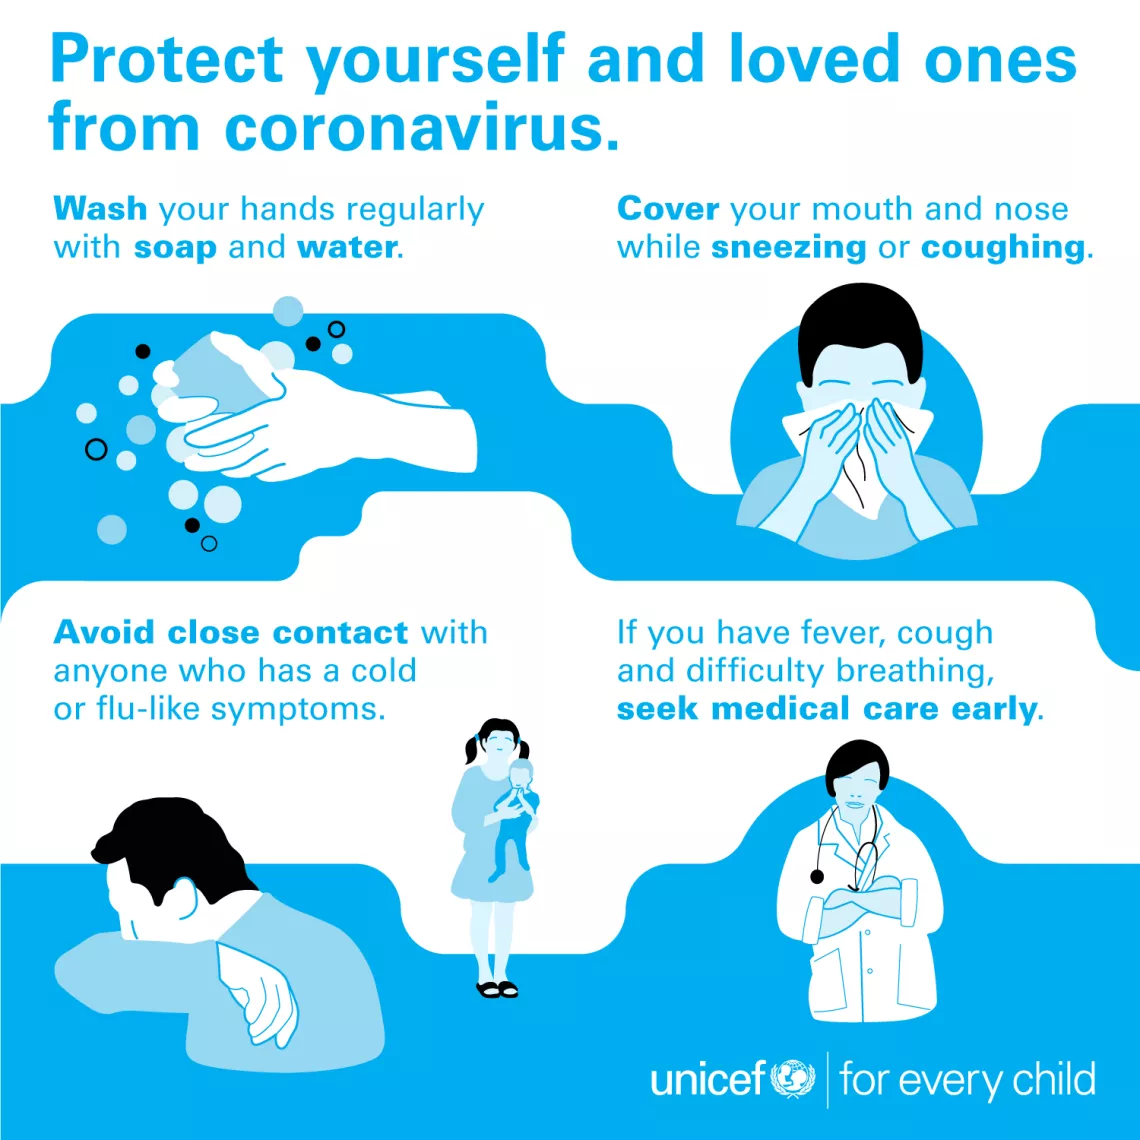 Important tips to protect you and your loved ones from coronavirus